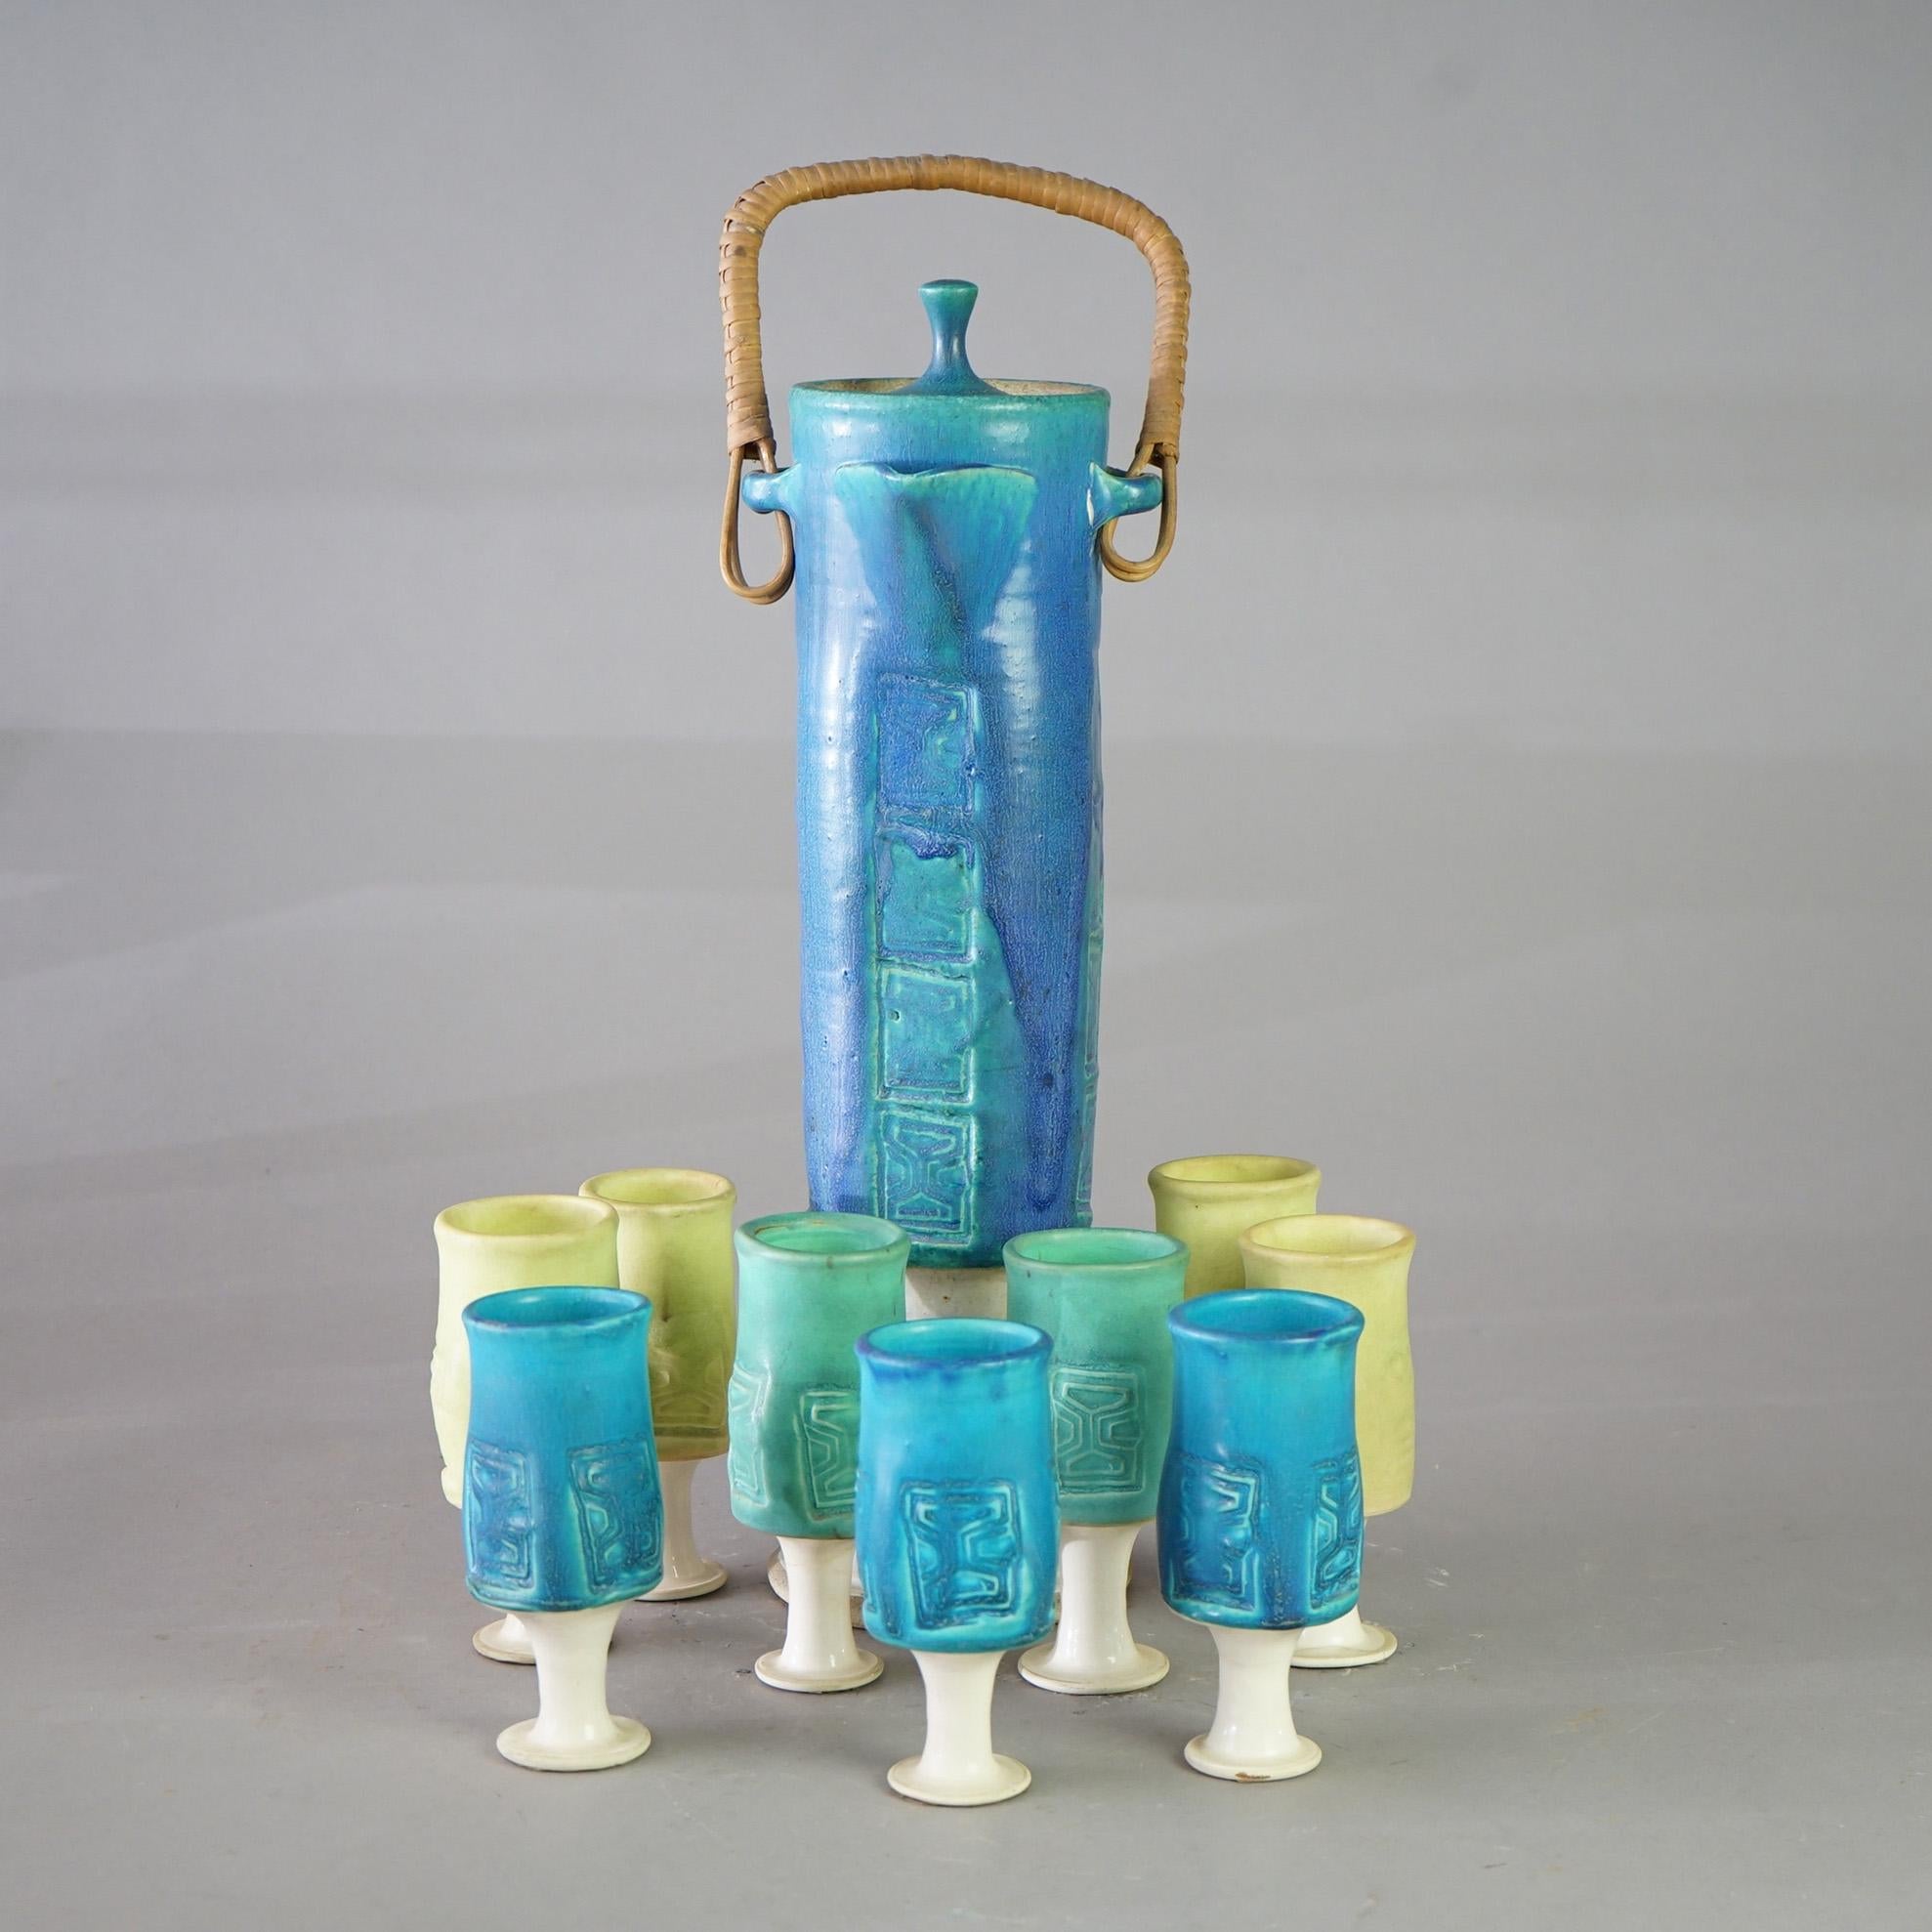 A Mid Century Modern cider set offers hand thrown studio art pottery construction with footed pitcher and cups, c1960

Measure - 20.5